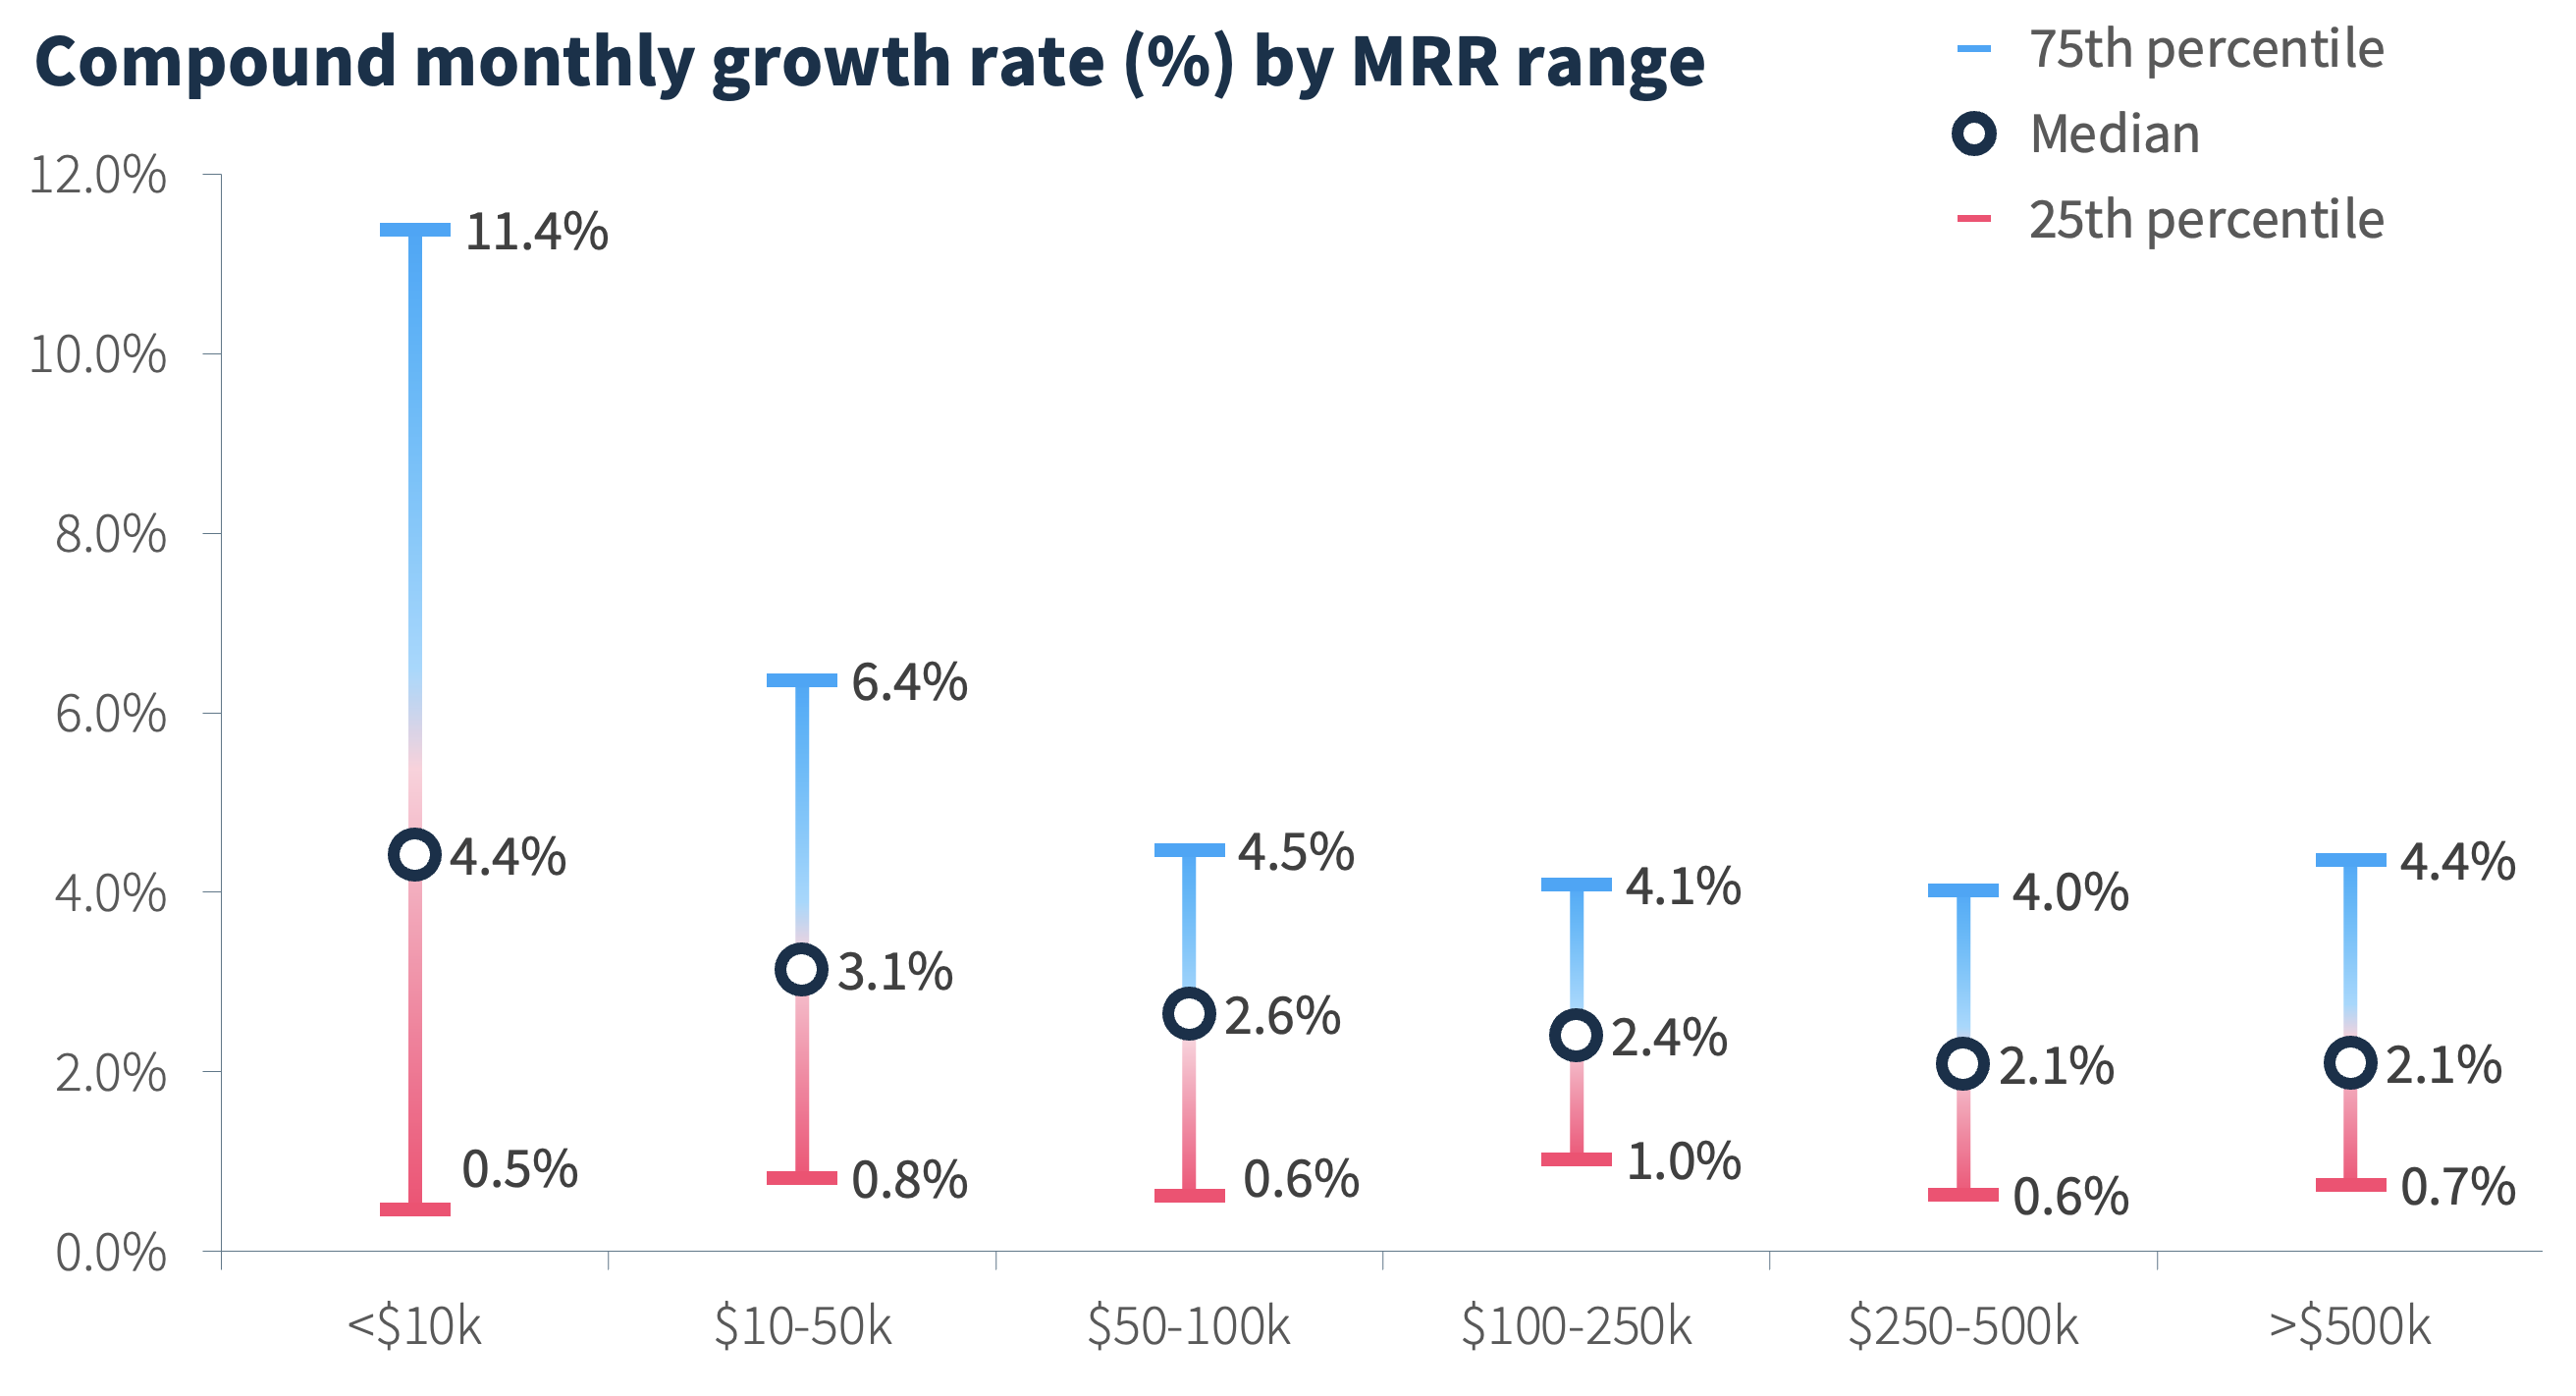 Percentile compound monthly growth rate by MRR range SaaS startups